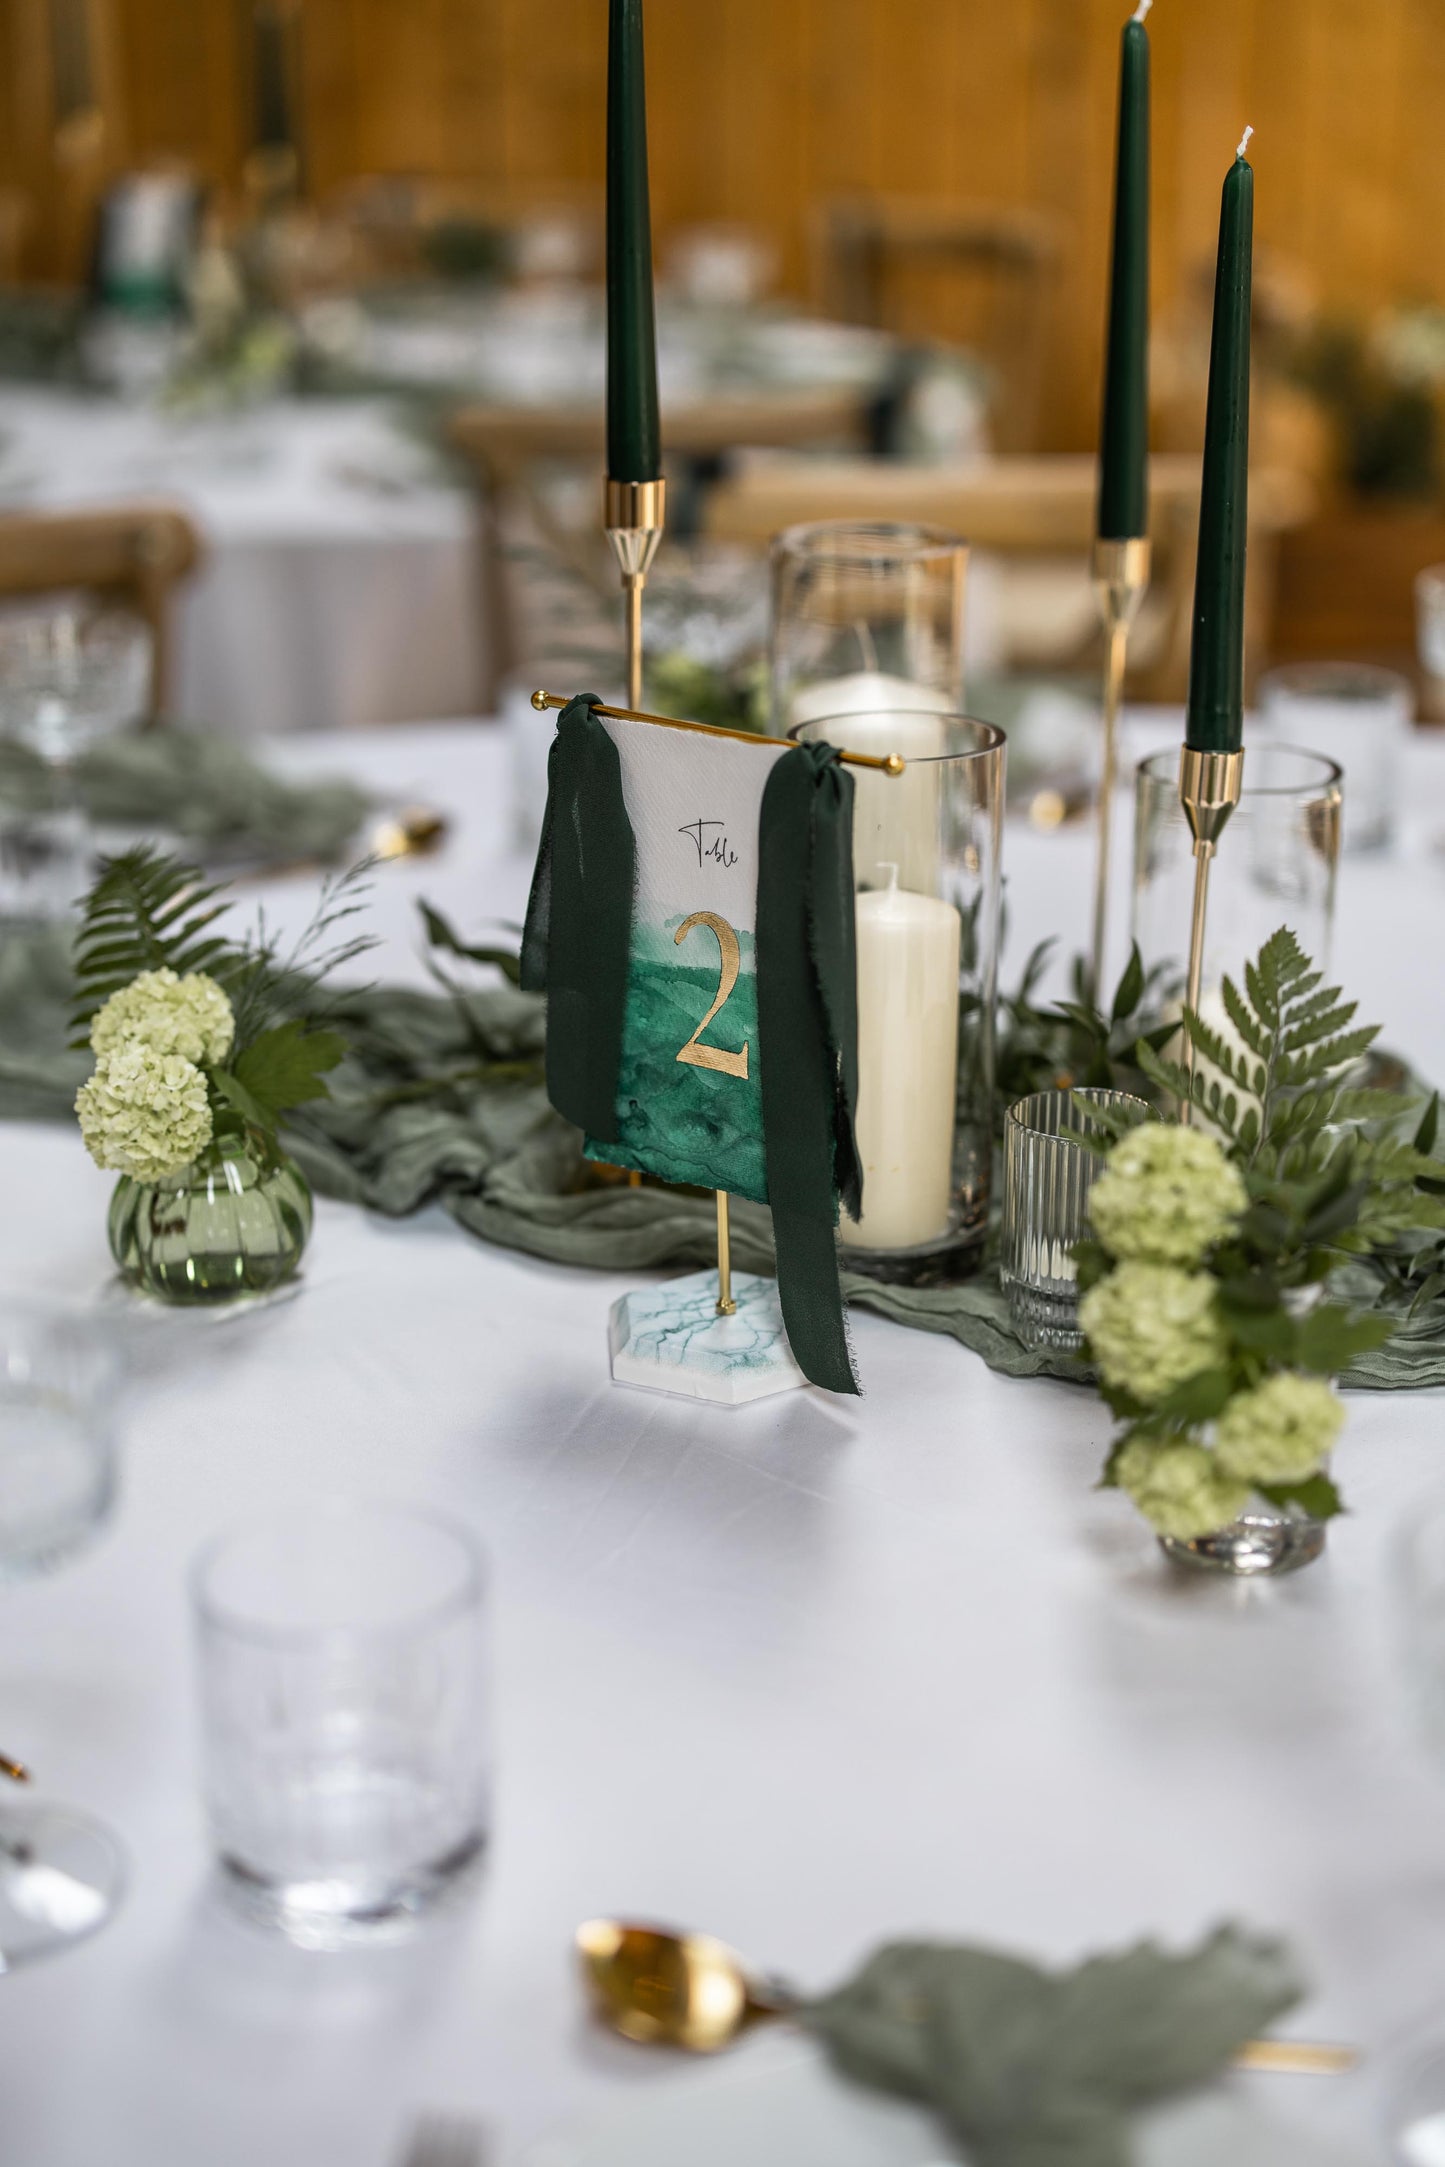 Hand painted hanging table numbers in Green and Gold